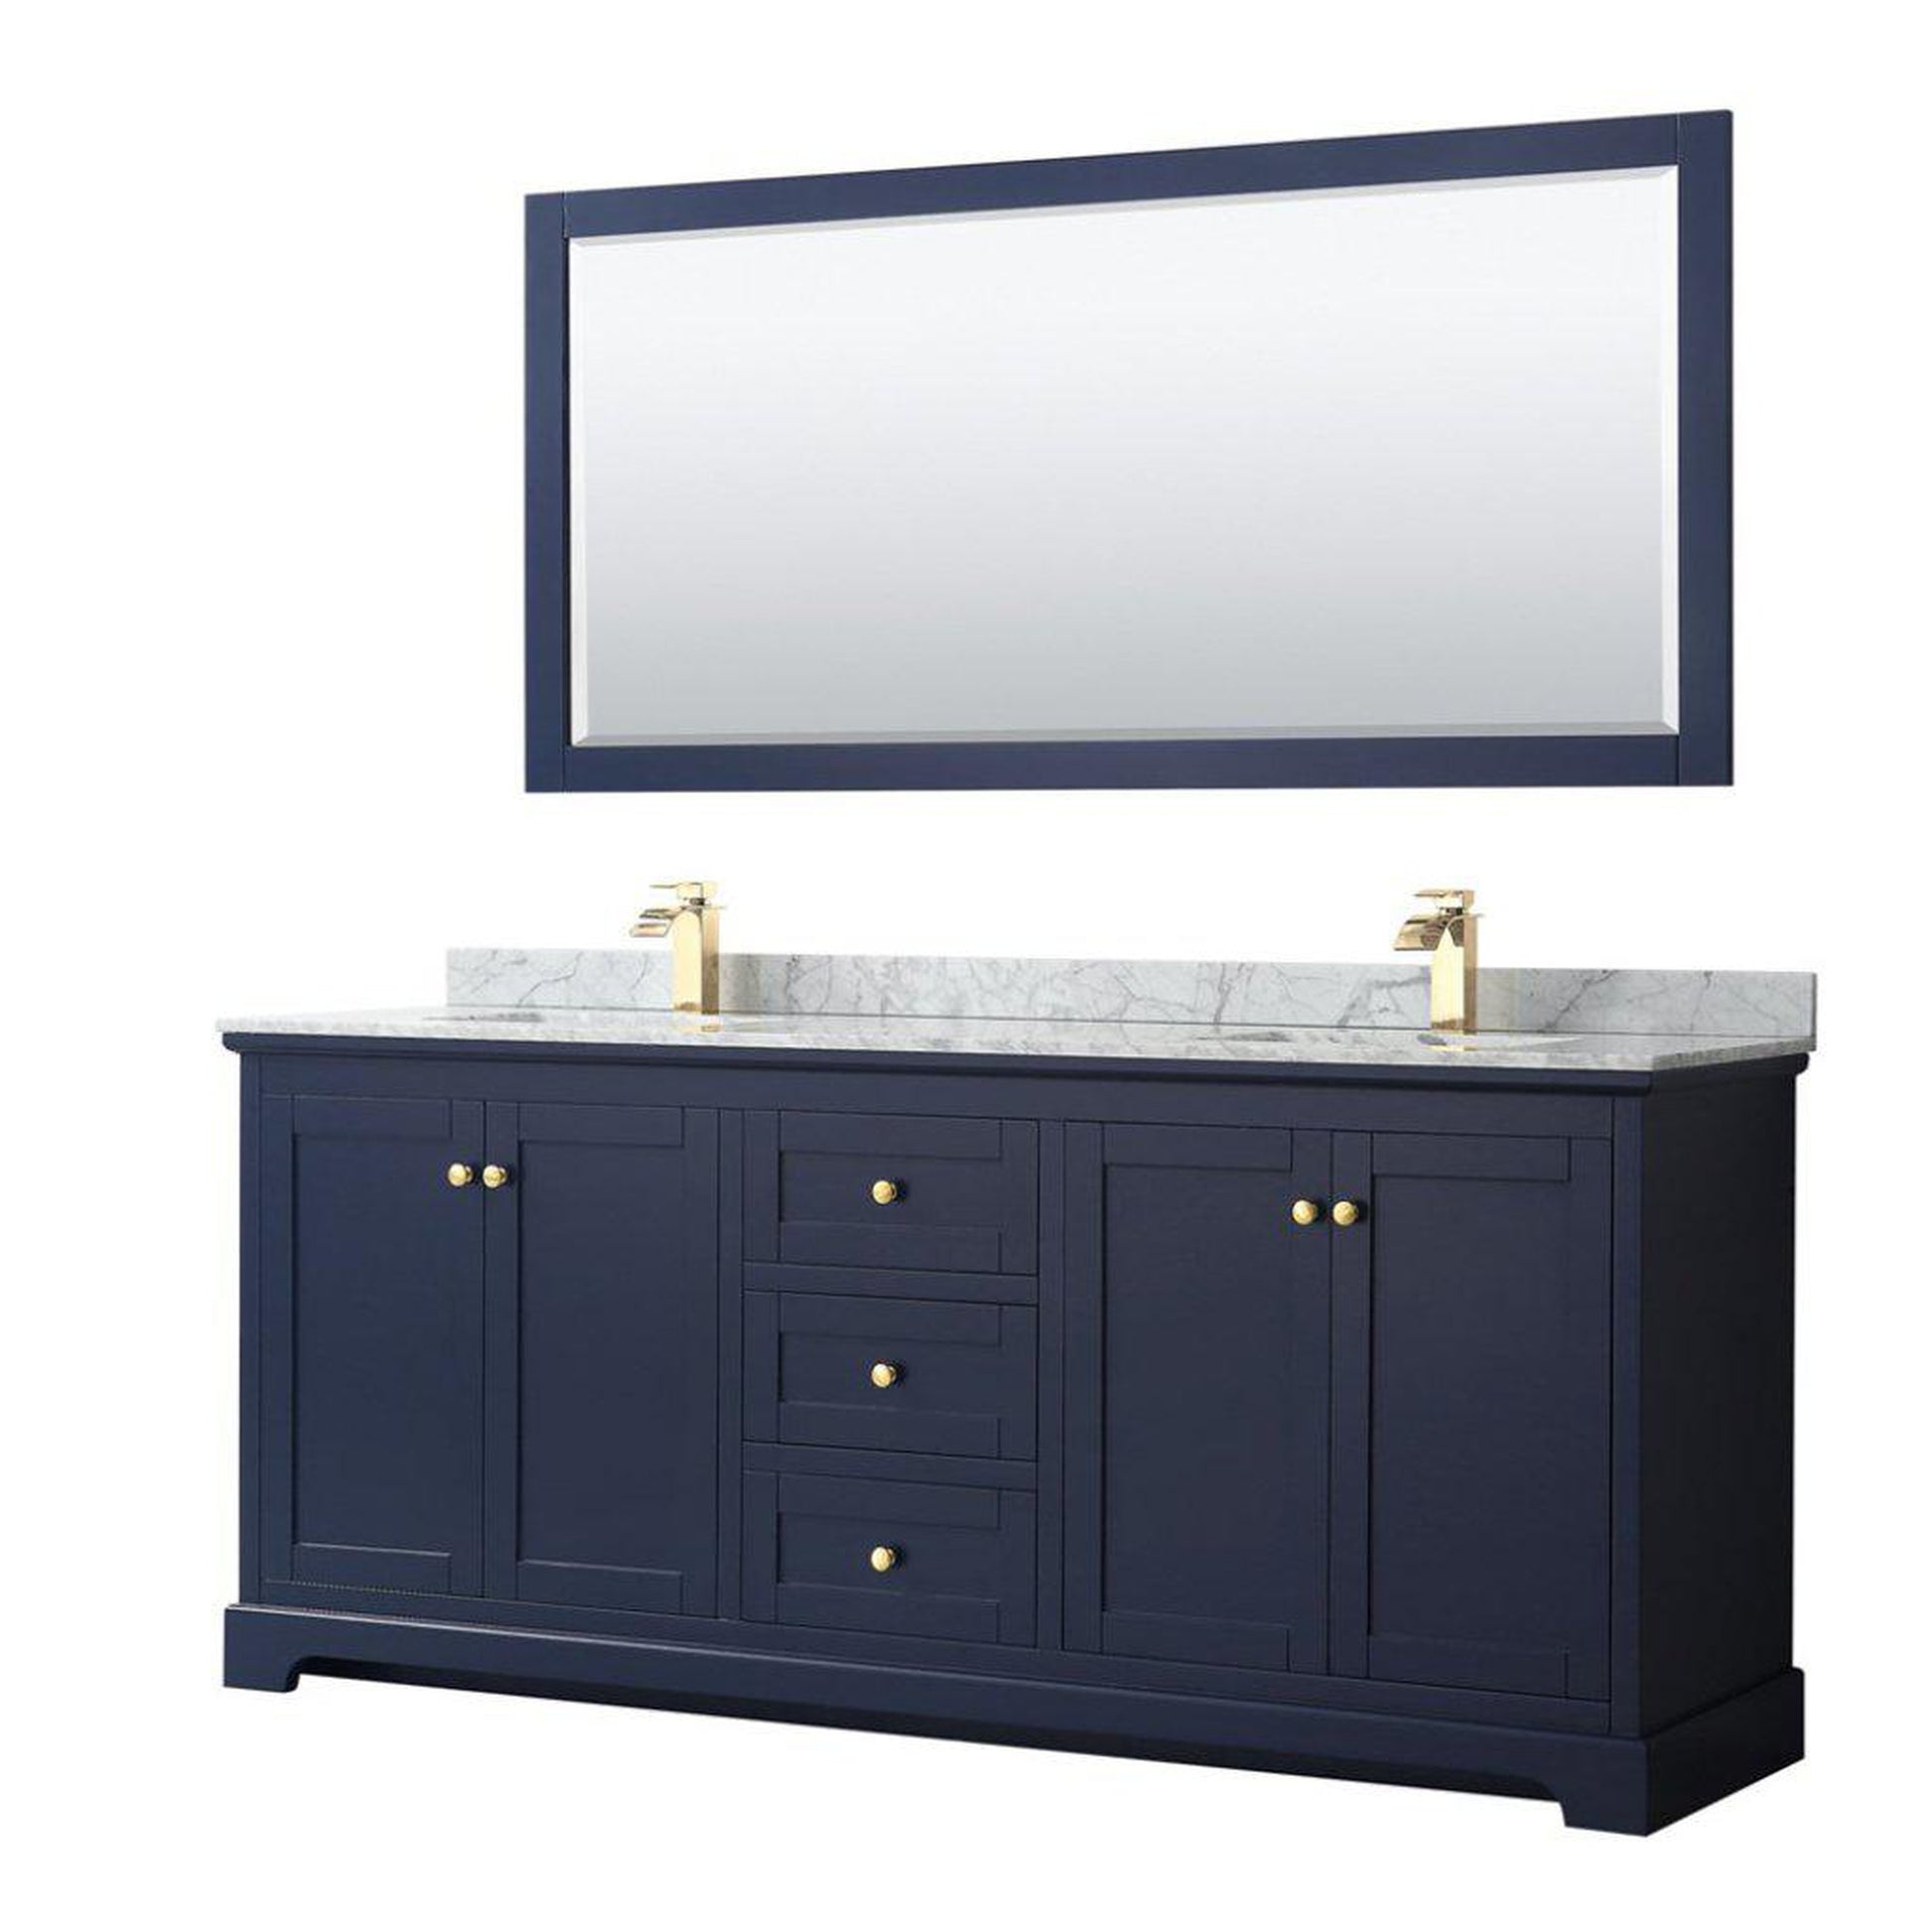 Wyndham Collection Avery 80" Dark Blue Double Bathroom Vanity Set With White Carrara Marble Countertop With 1-Hole Faucet And Square Sink And 70" Mirror